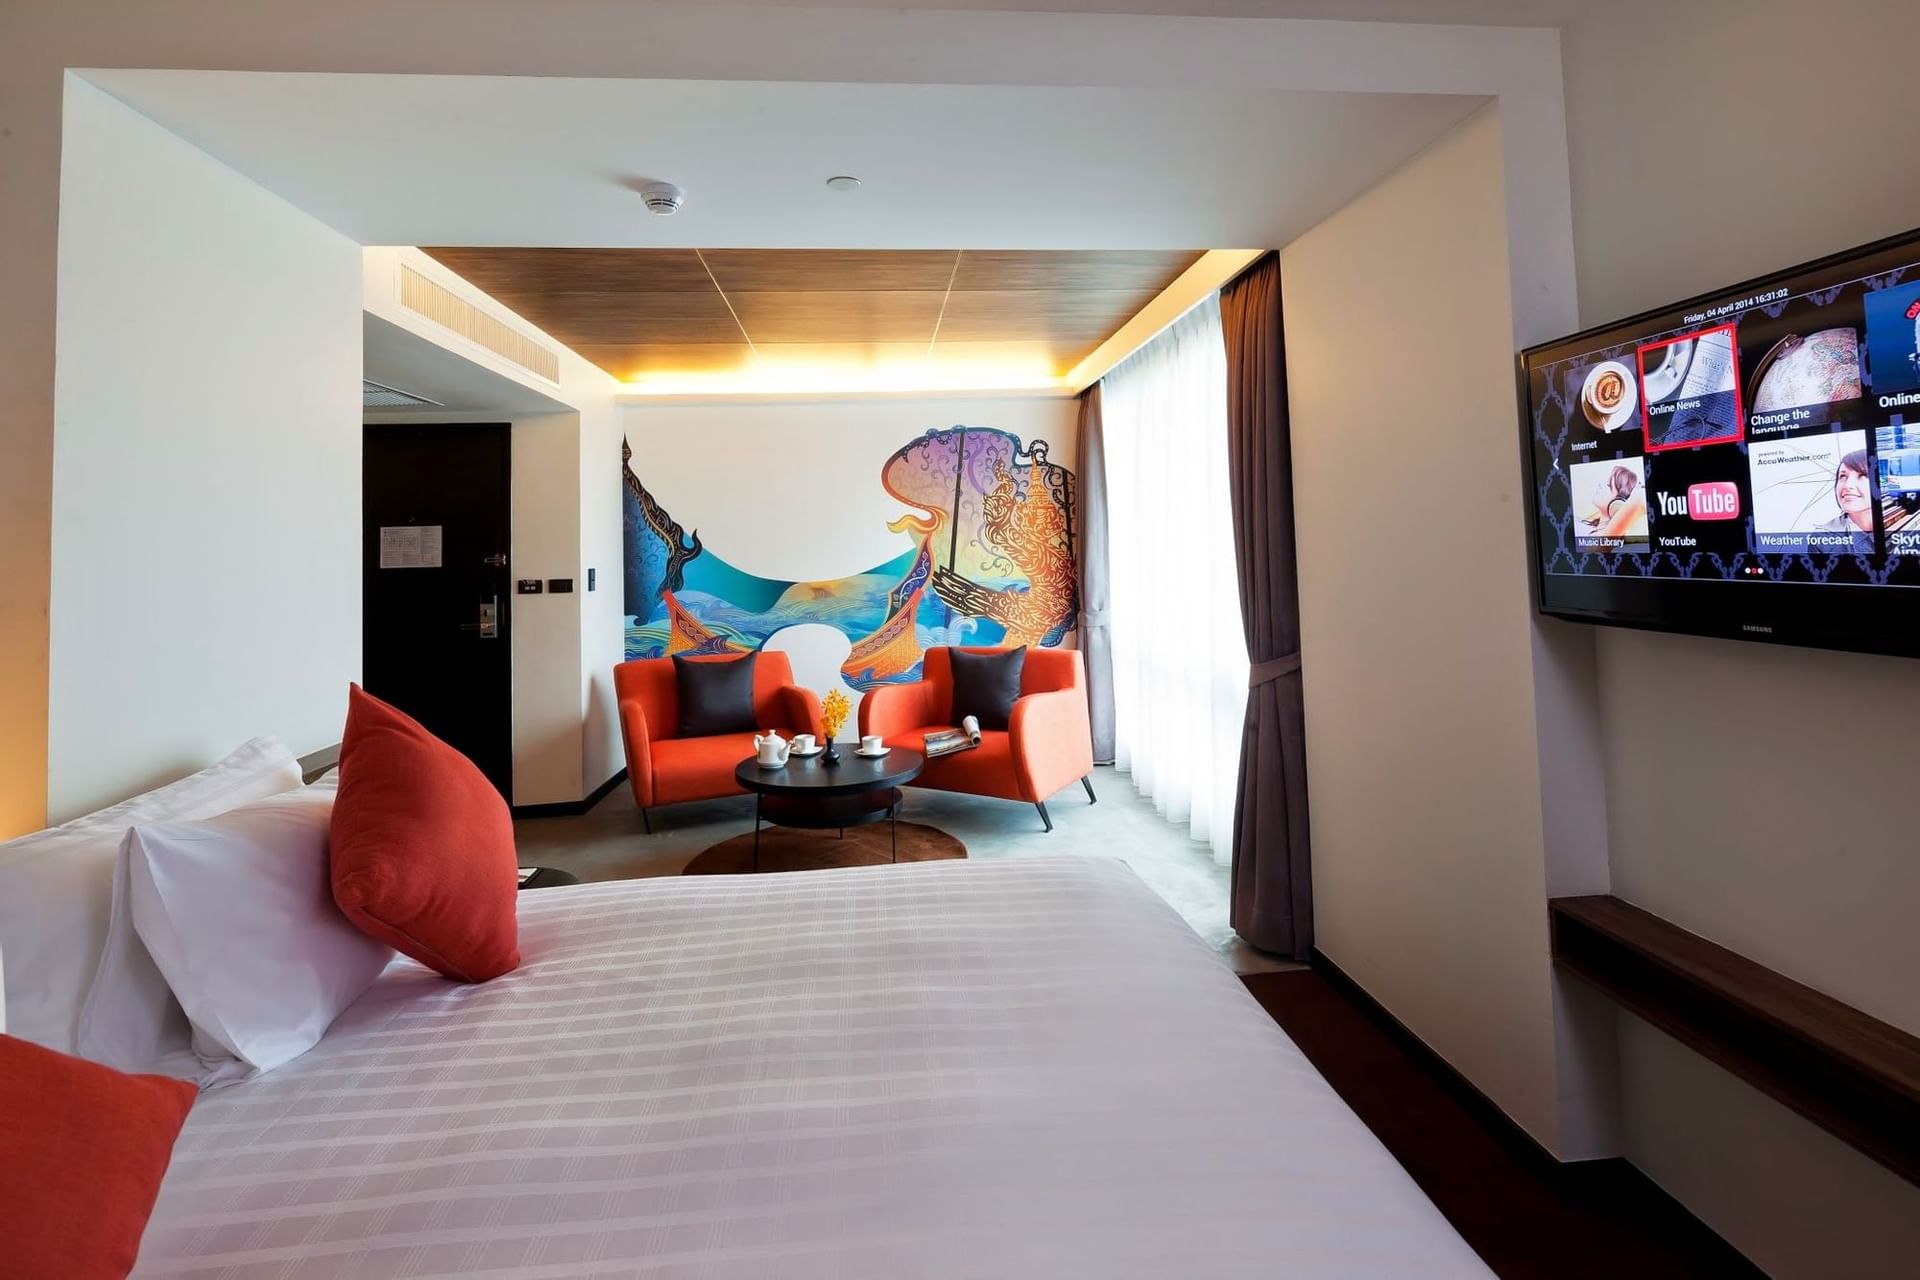 Hotel Bedroom with sitting area, television and a decorative wal